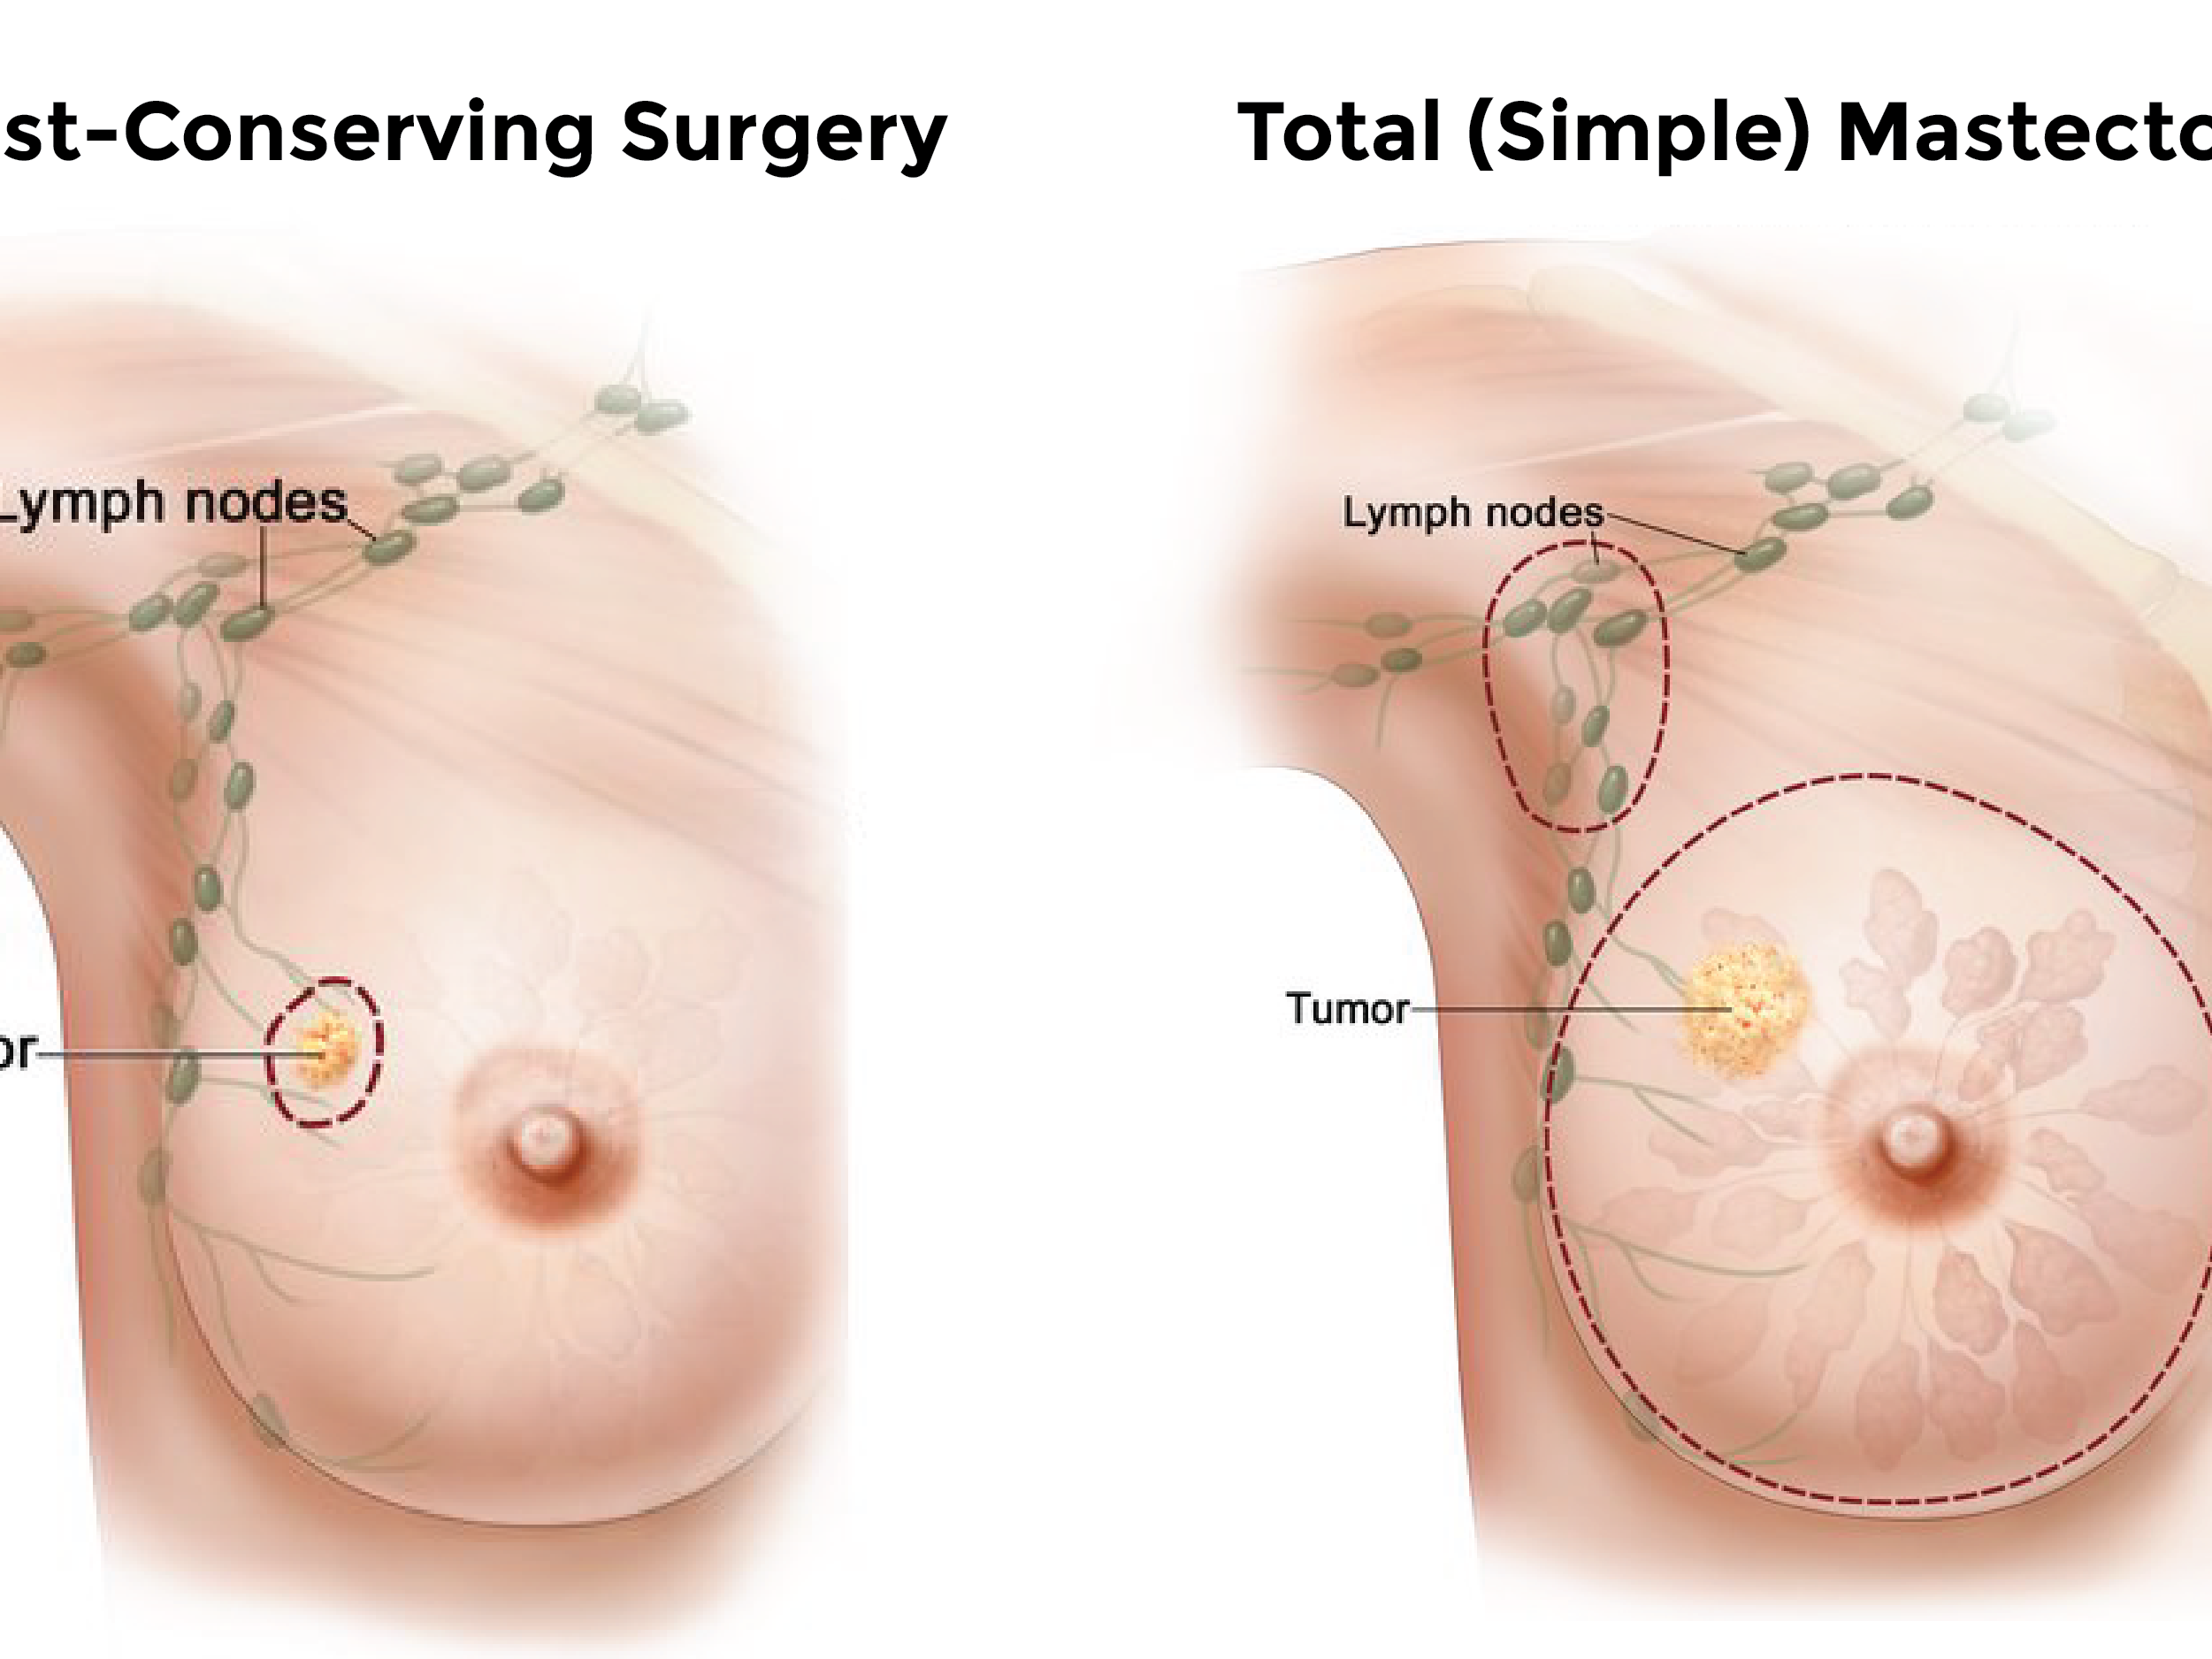 Know more about advanced Breast Enlargement Procedure